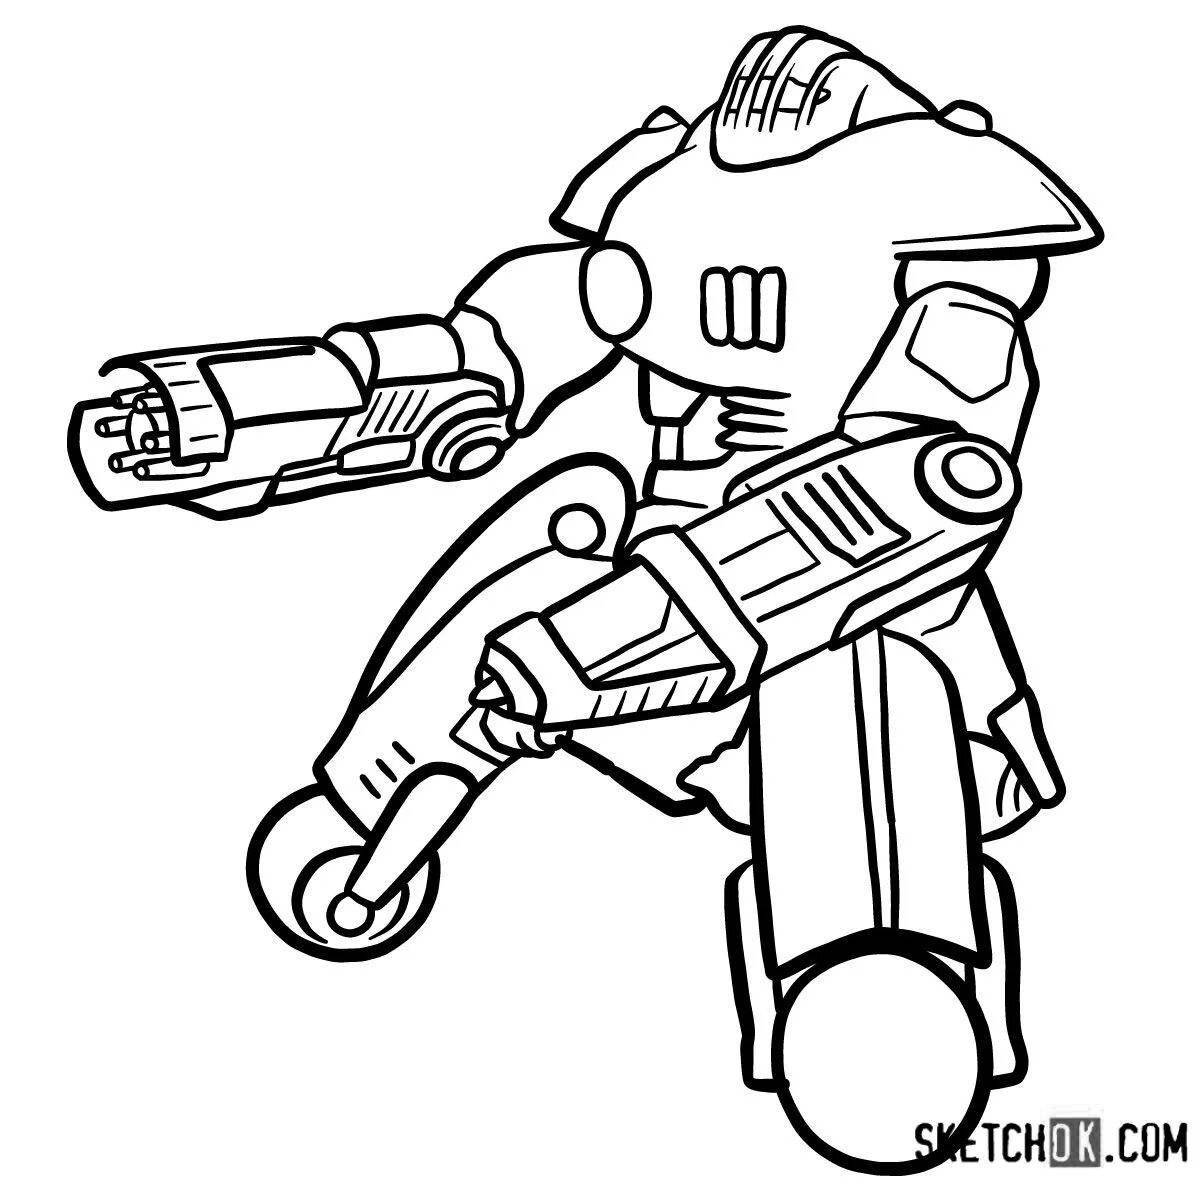 Amazing fallout coloring book